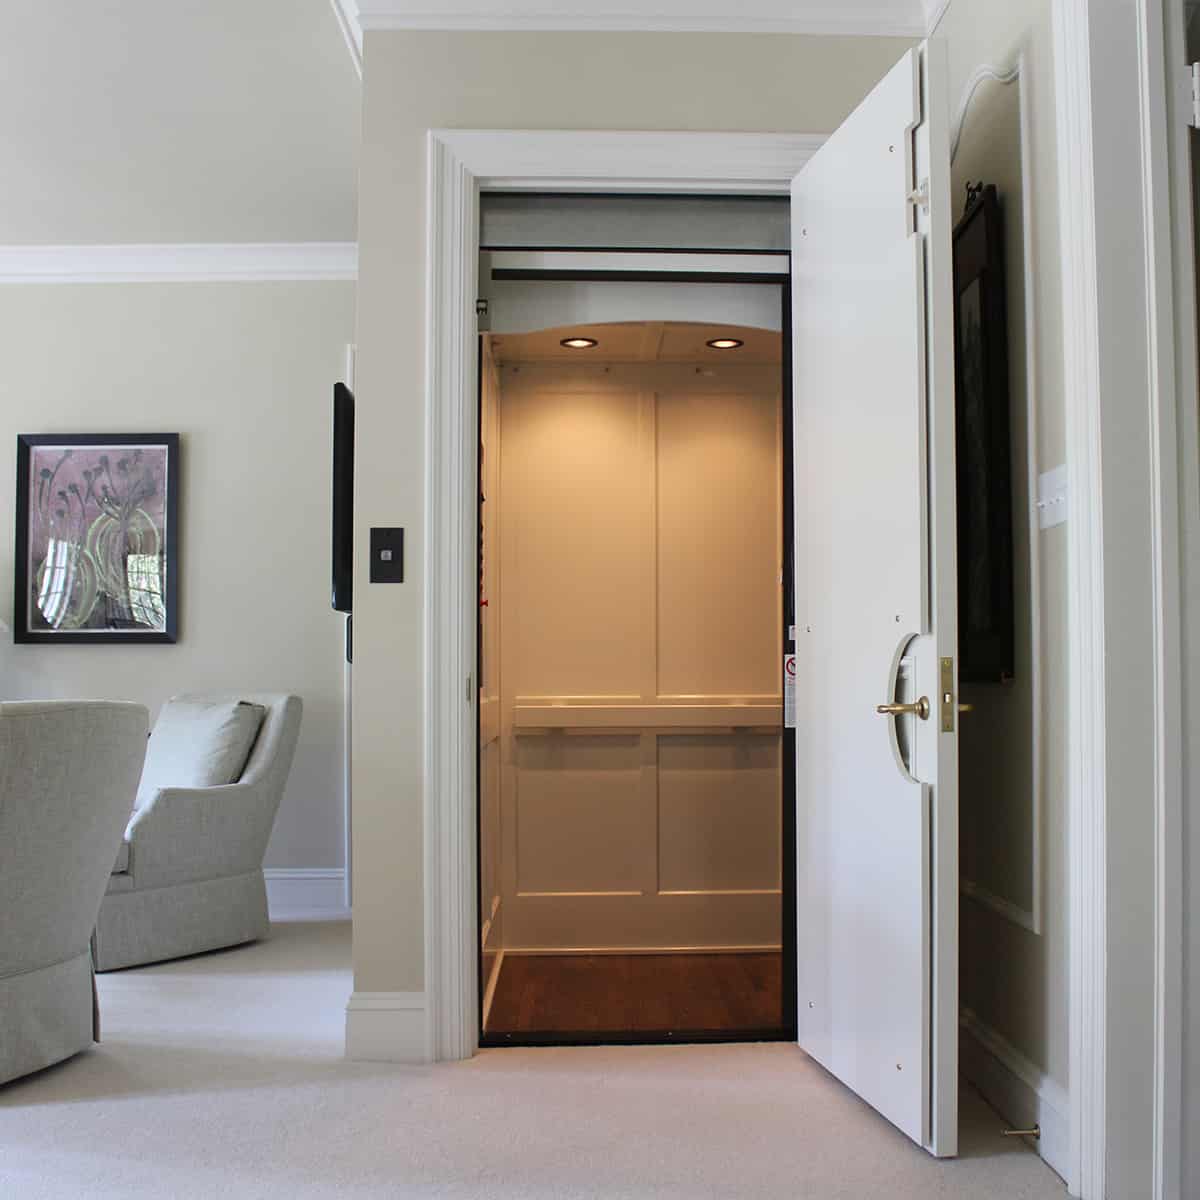 How Much Does A Home Elevator Cost